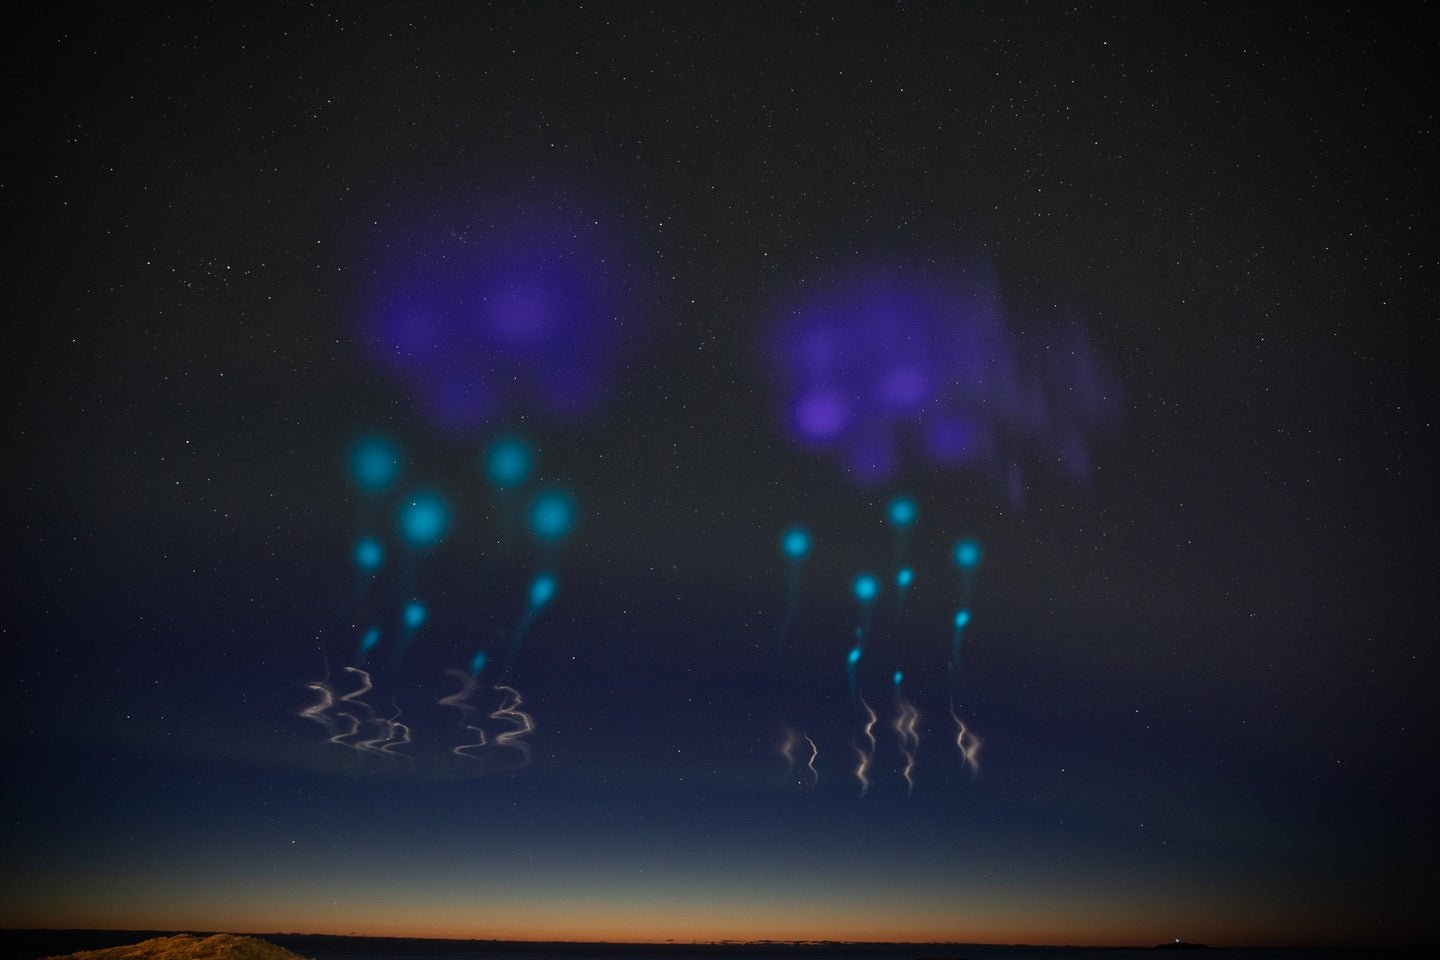 NASA created these alien clouds to study our atmosphere